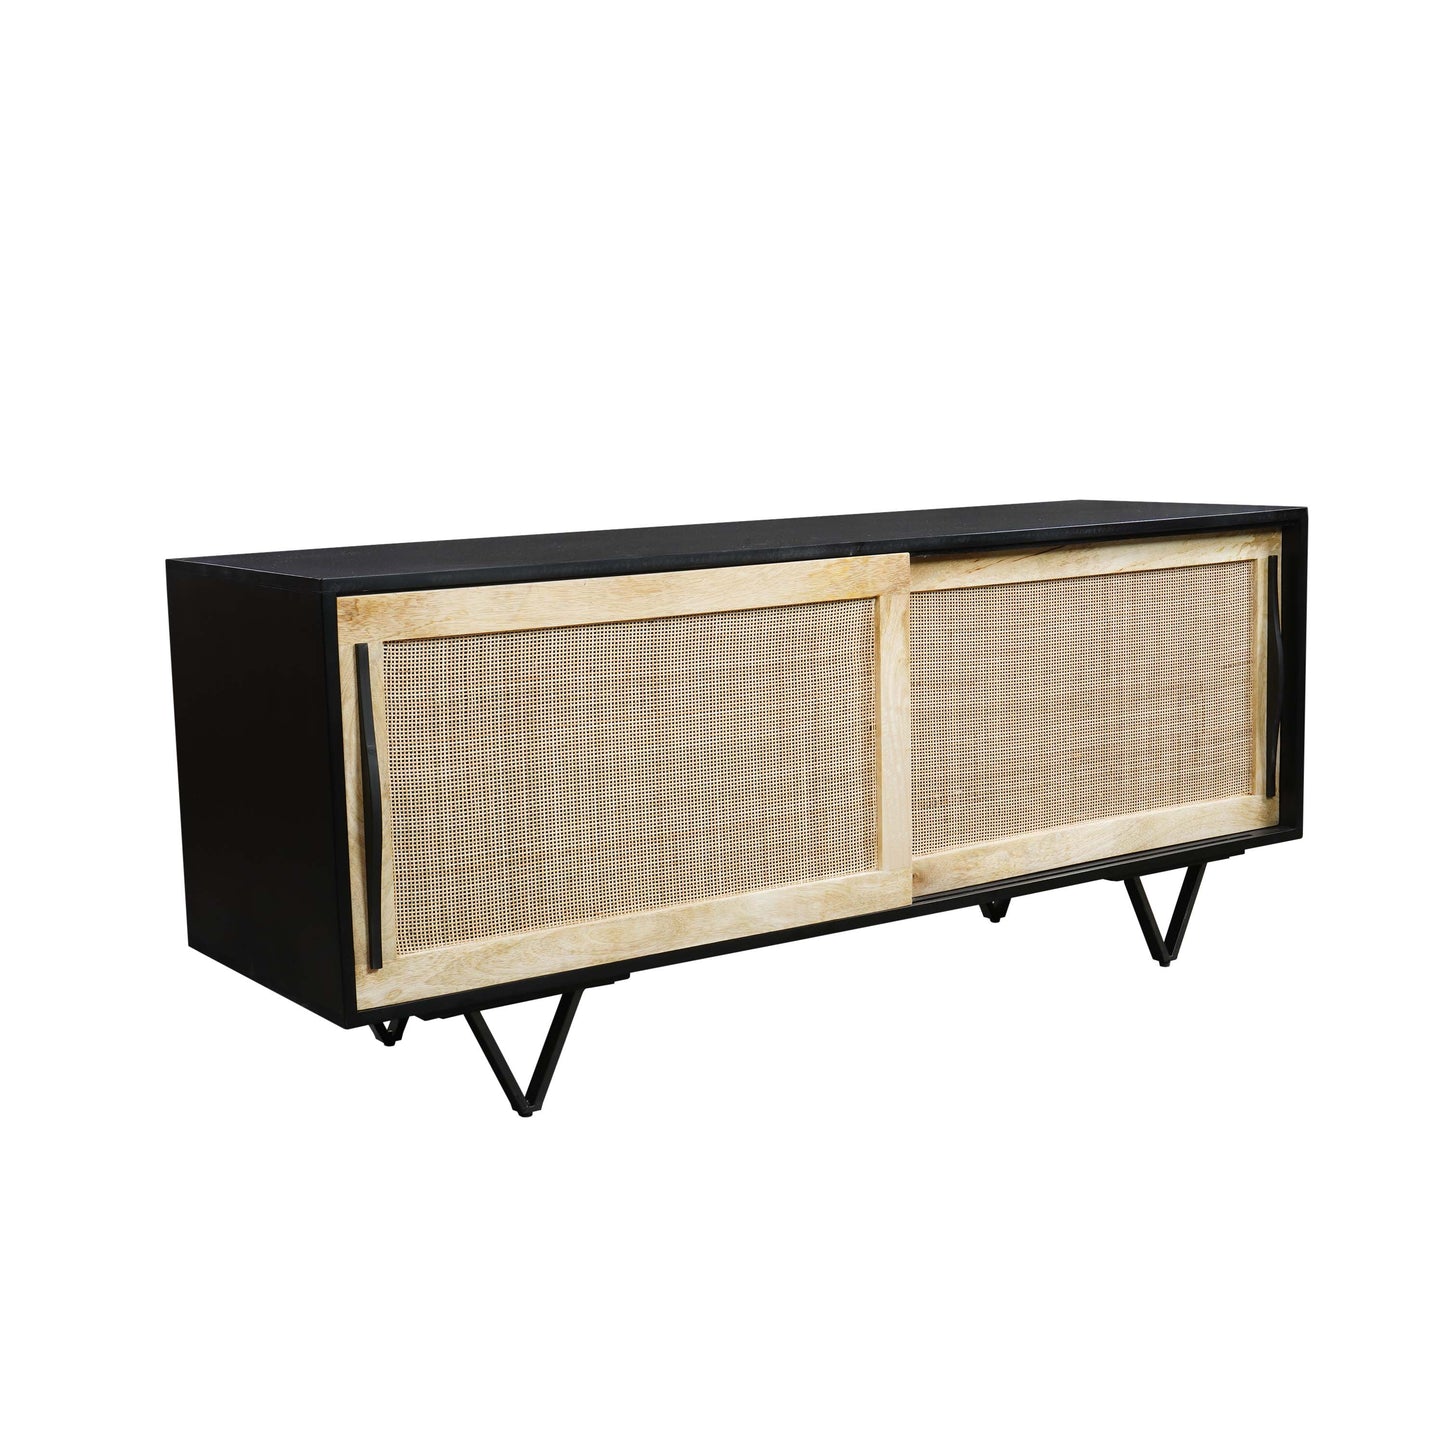 Handcrafted 60-Inch TV Media Console with Rattan Sliding Doors - Natural Brown And Matte Black Finish By The Urban Port